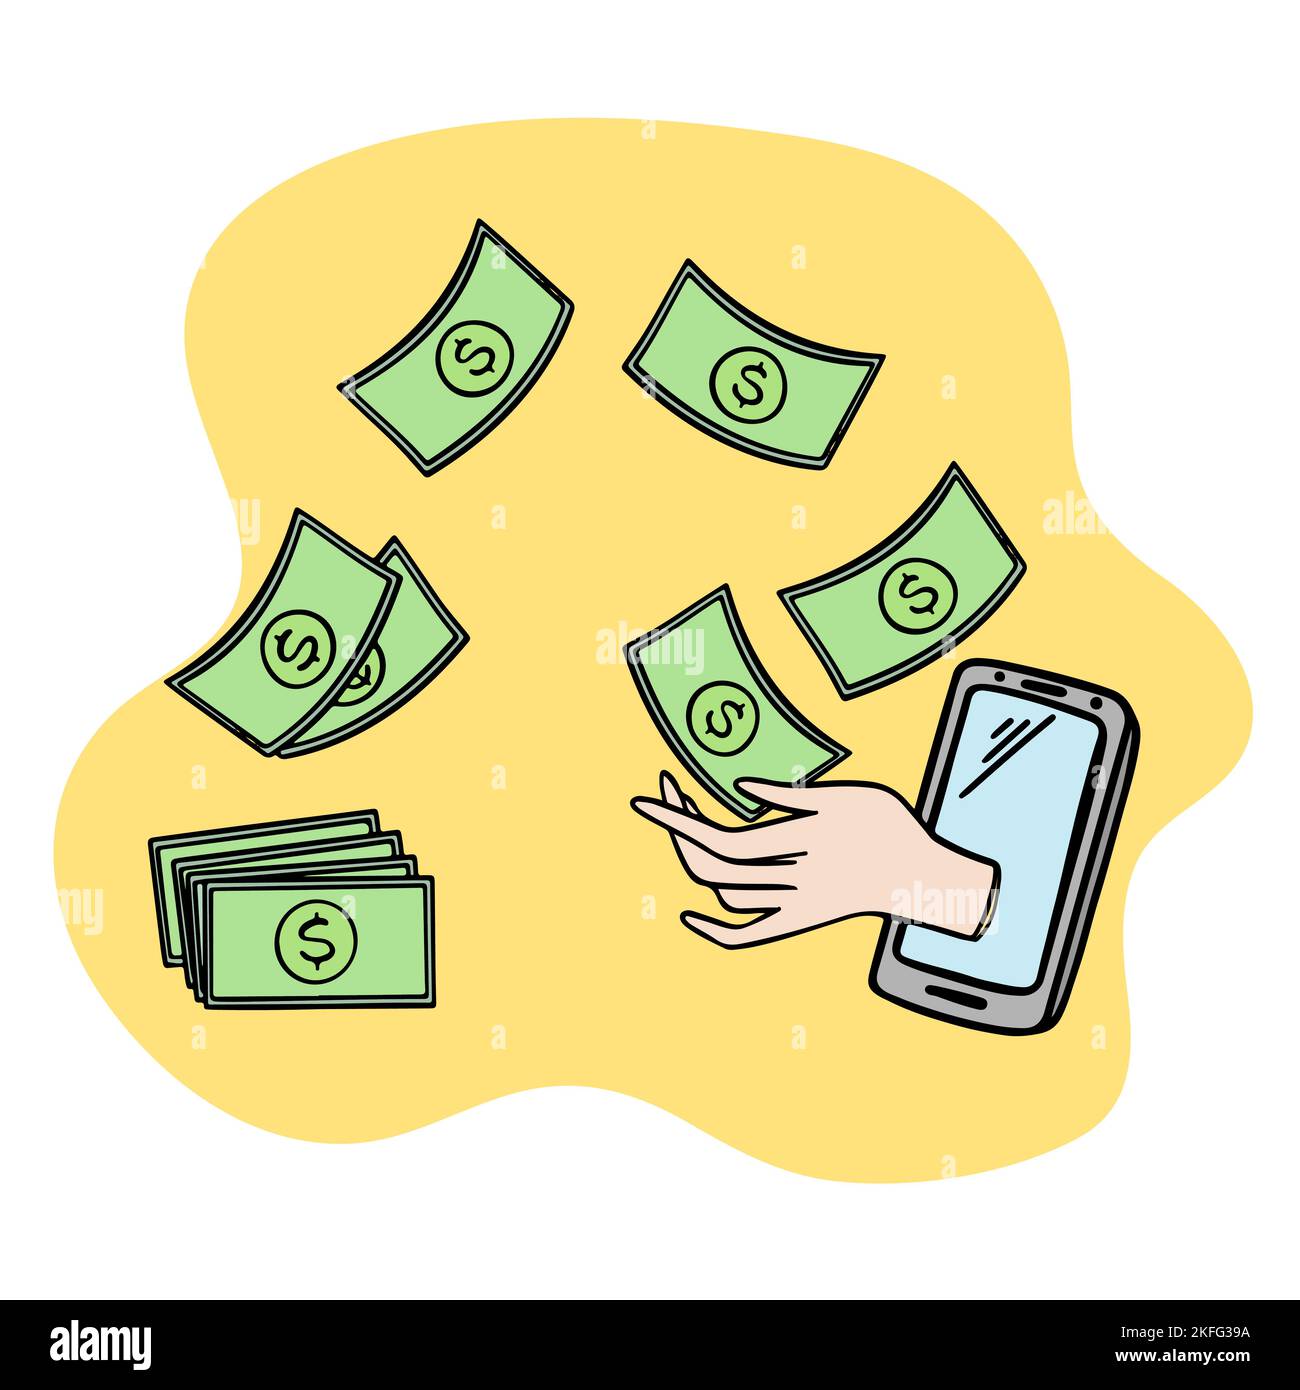 FLYING DOLLARS AND SMARTPHONE Online E-Commerce Internet Sells Store For Modern Crypto Network Technology Trade Marketplace With Non-fungible Token Mo Stock Vector